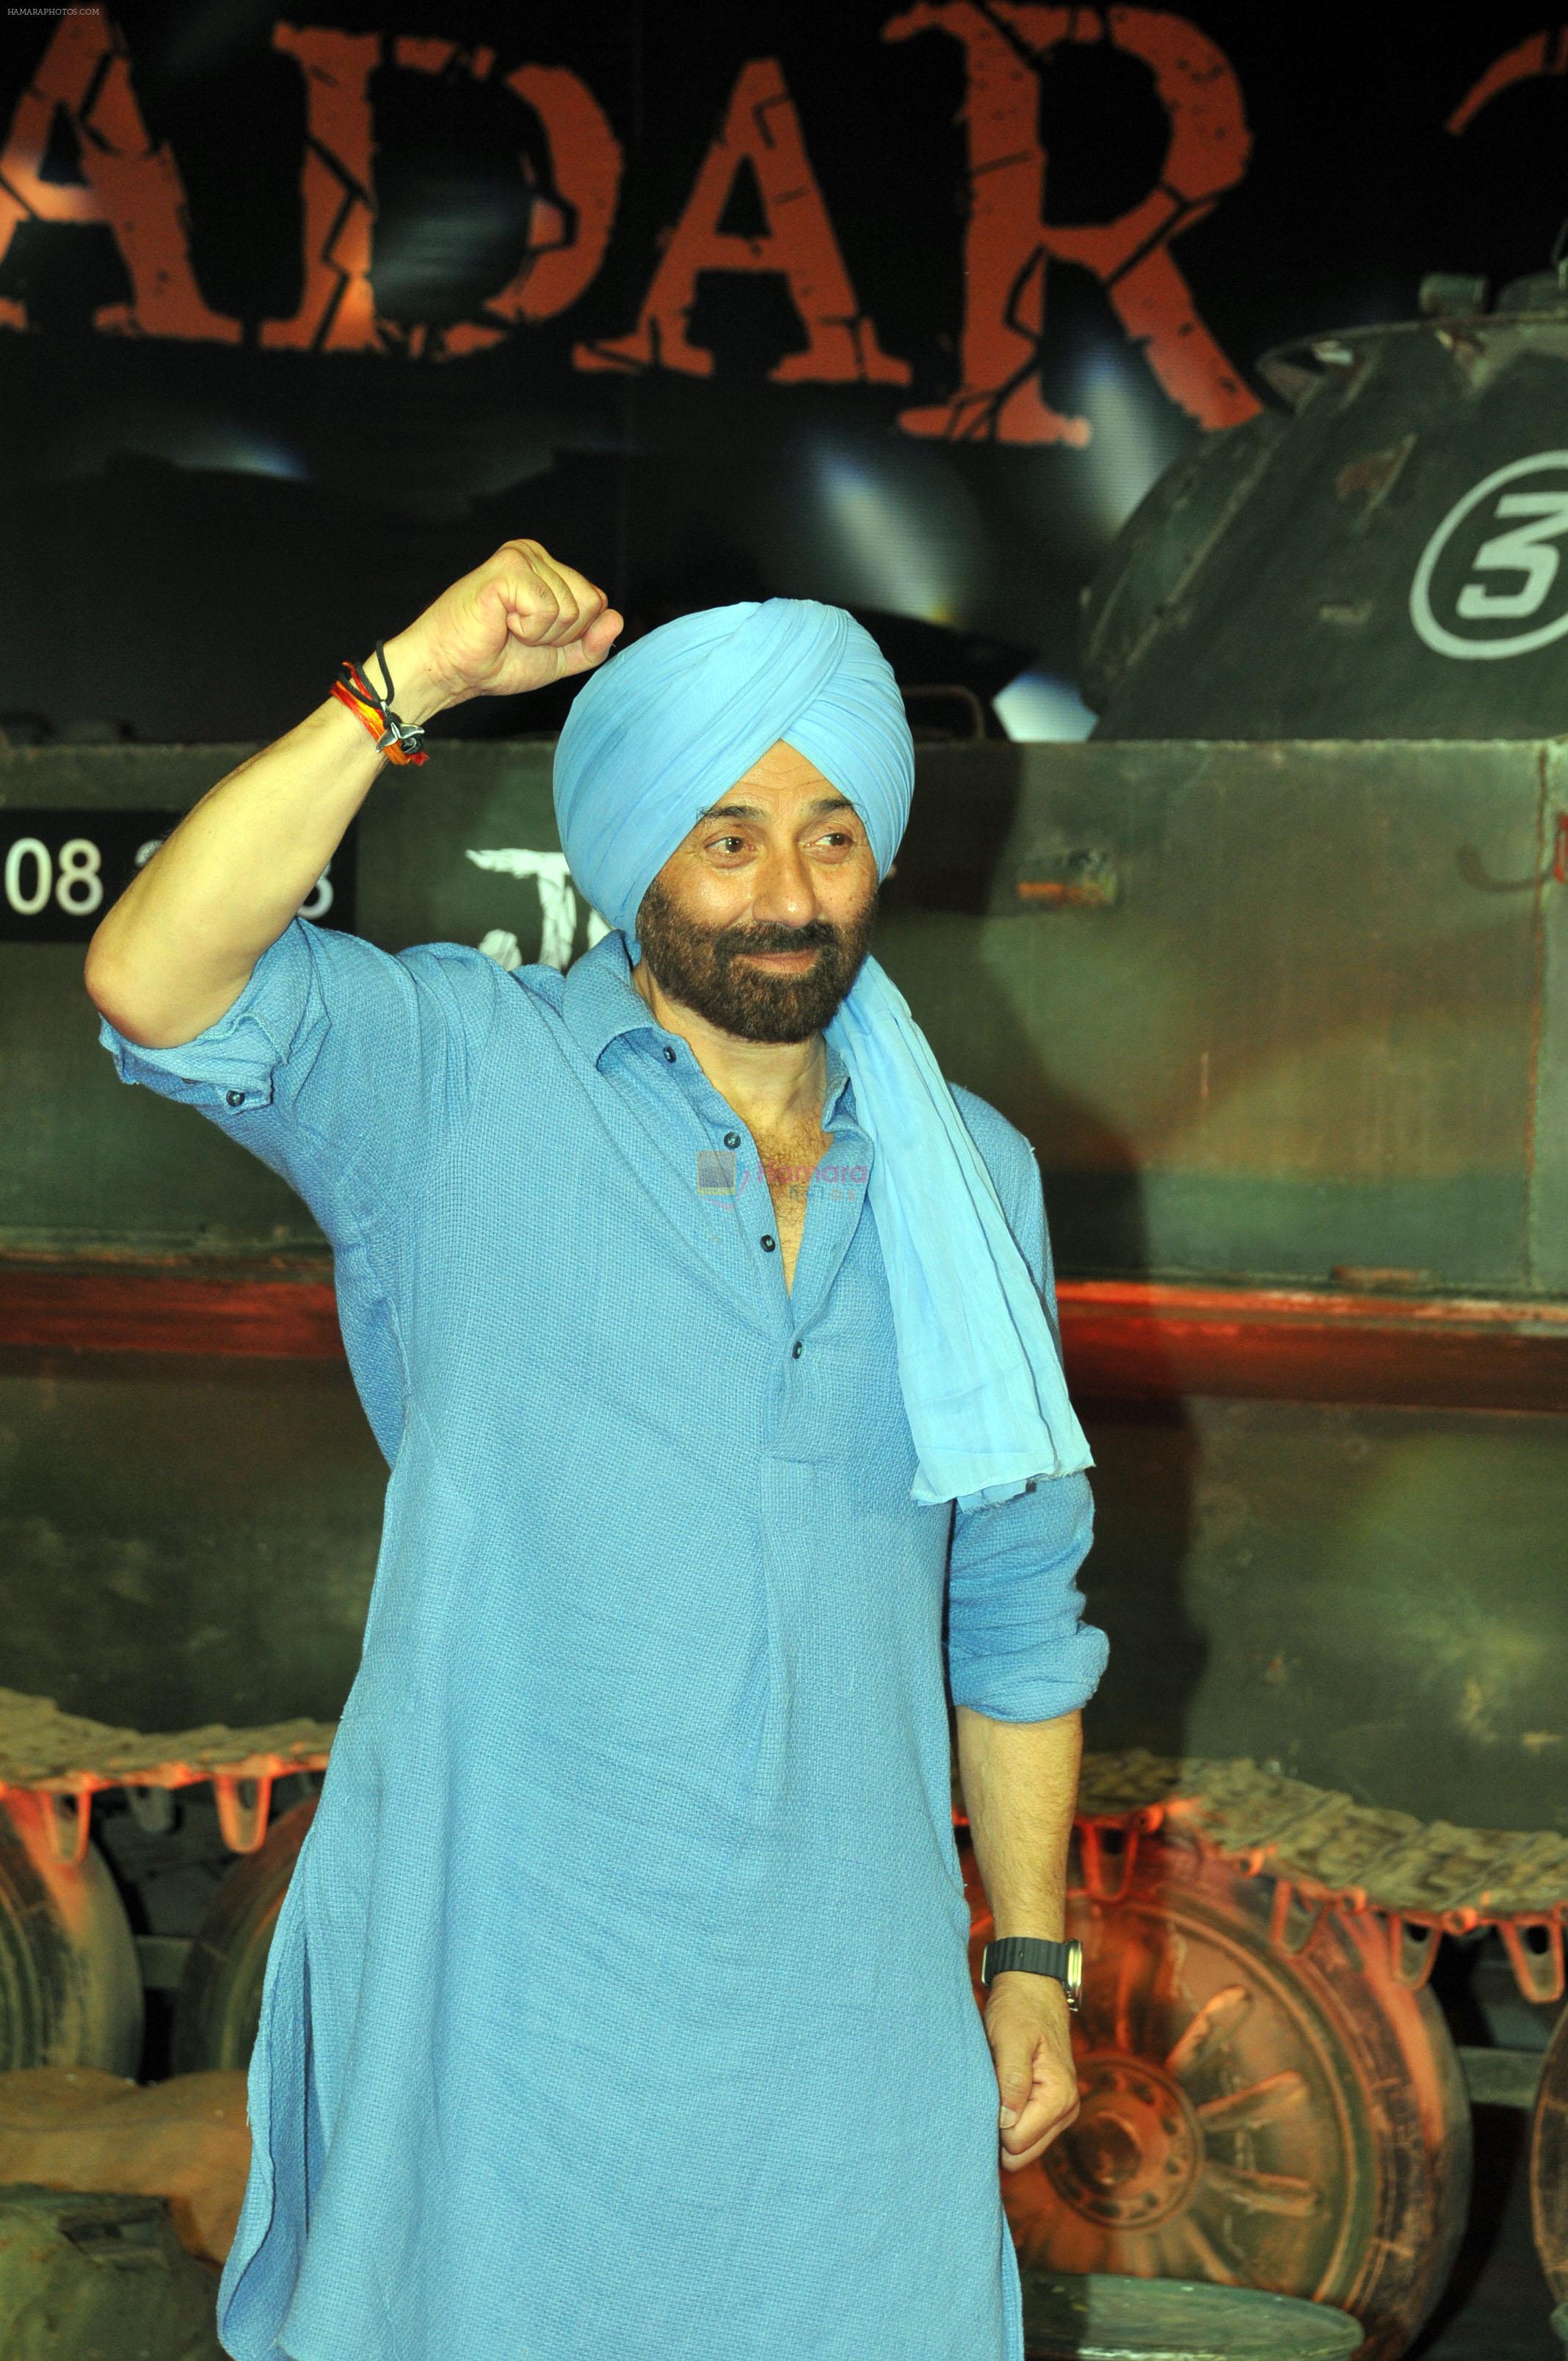 Sunny Deol at the Grand Premiere of Film Gadar 2 on 11th August 2023